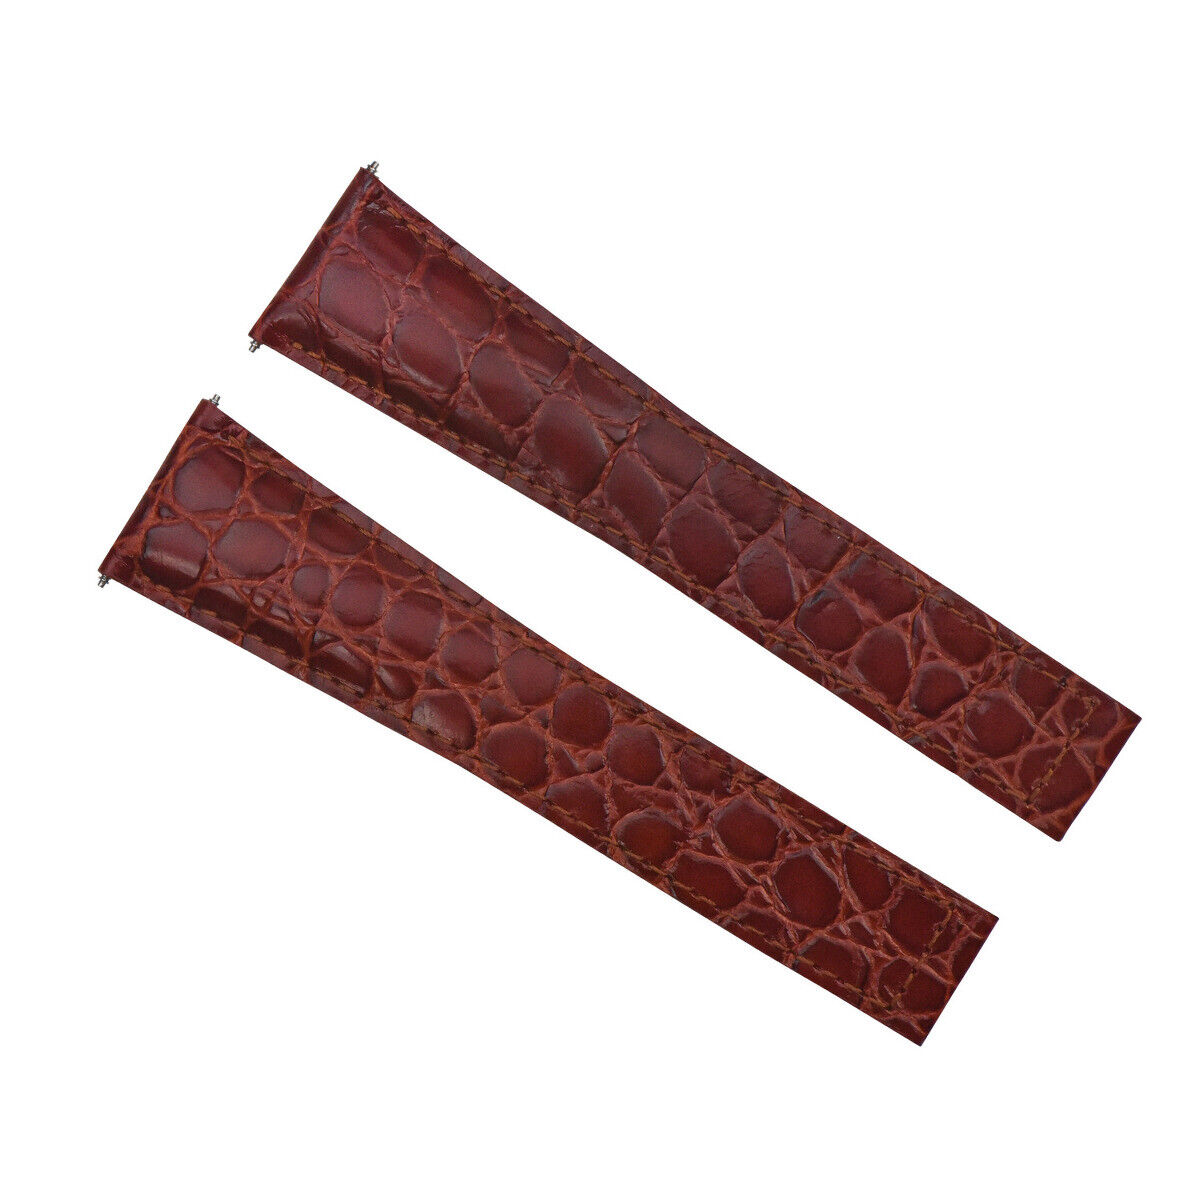 24MM GENUINE LEATHER WATCH STRAP ALLIGATOR GRAIN BAND FOR MAURICE LACROIX BURGANDY